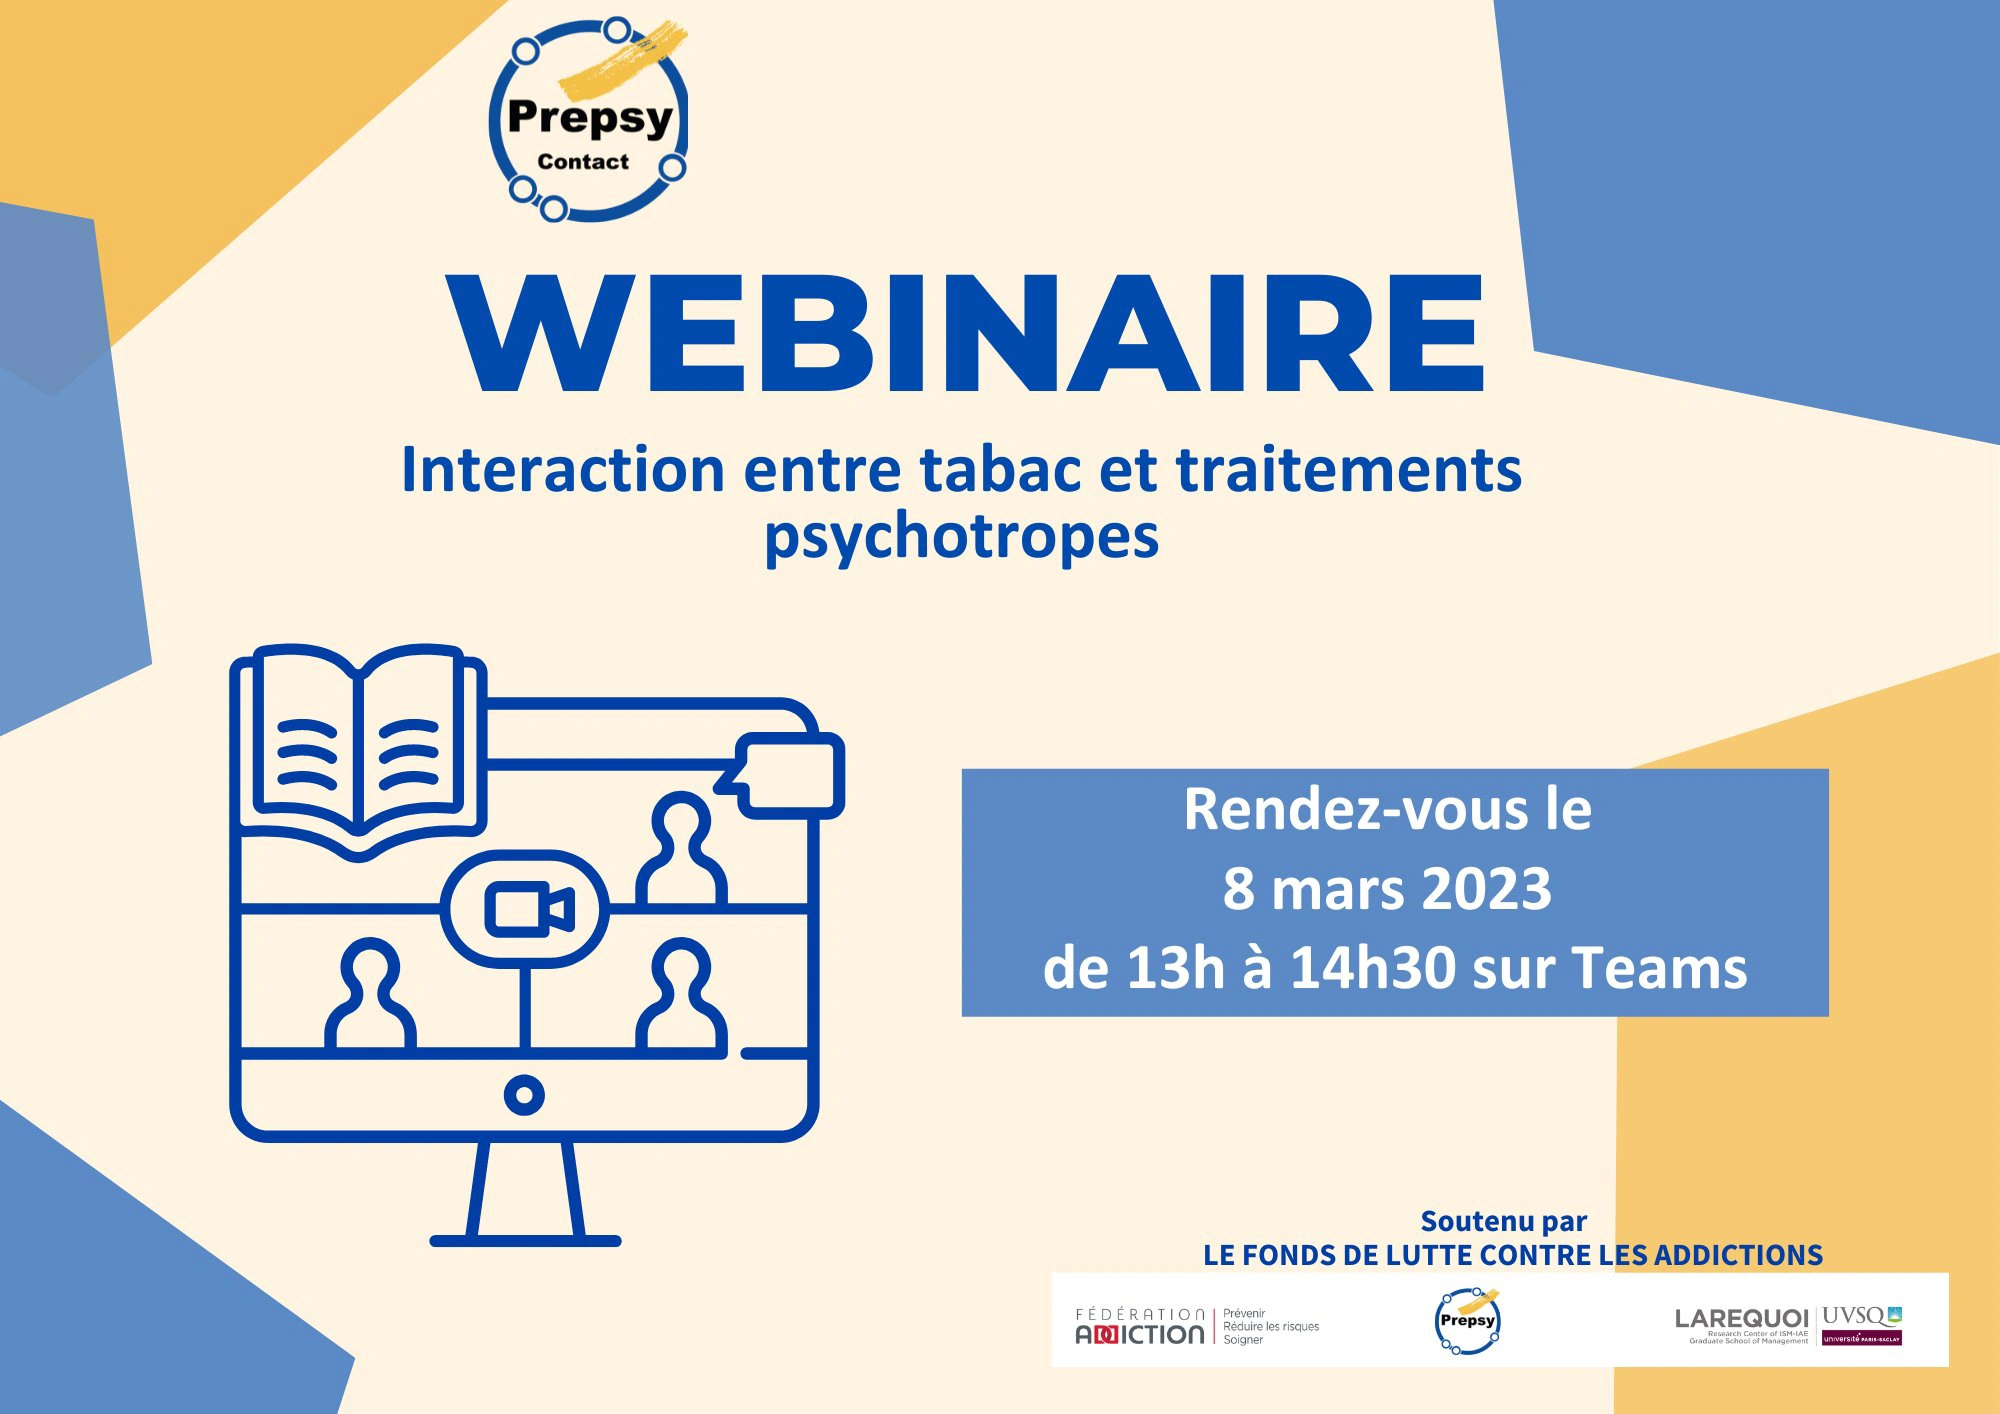 webinaires_prepsy_contact-2.png